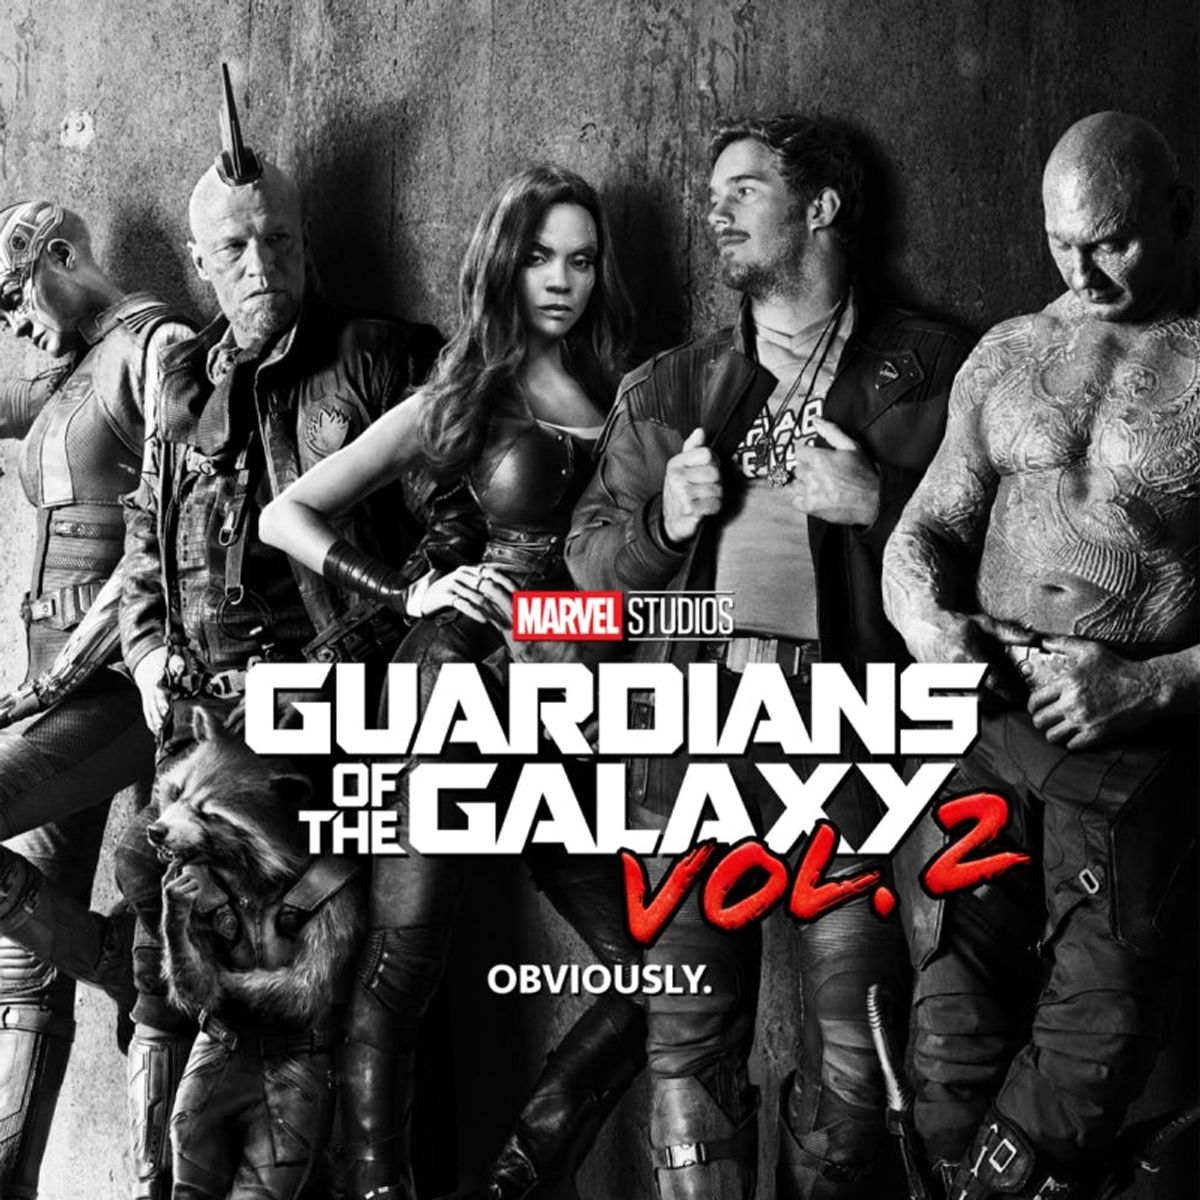 People Are Losing Their Minds Over the New Guardians of the Galaxy Vol. 2 Trailer